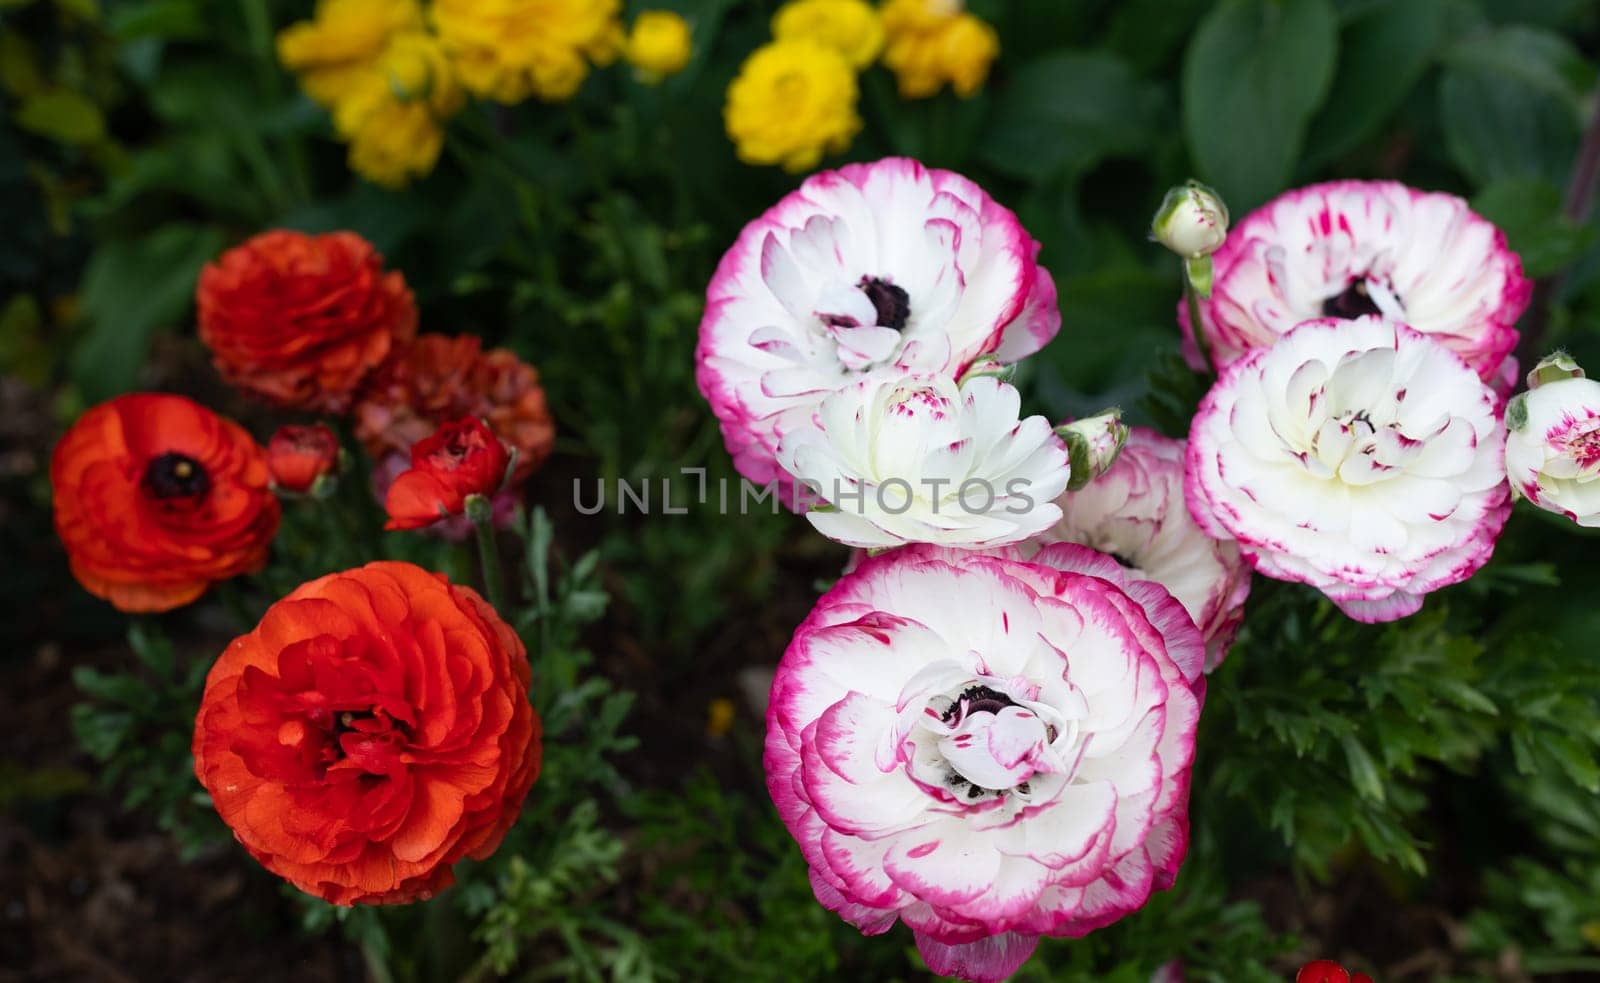 Multi Colored Rimmed Persian Buttercup Flower Or Ranunculus Asiaticus Outdoors In Garden Or Plant Nursery. Red, Yellow, White And Purple Flowers, Botany, Floriculture. Horizontal Plane High quality photo.